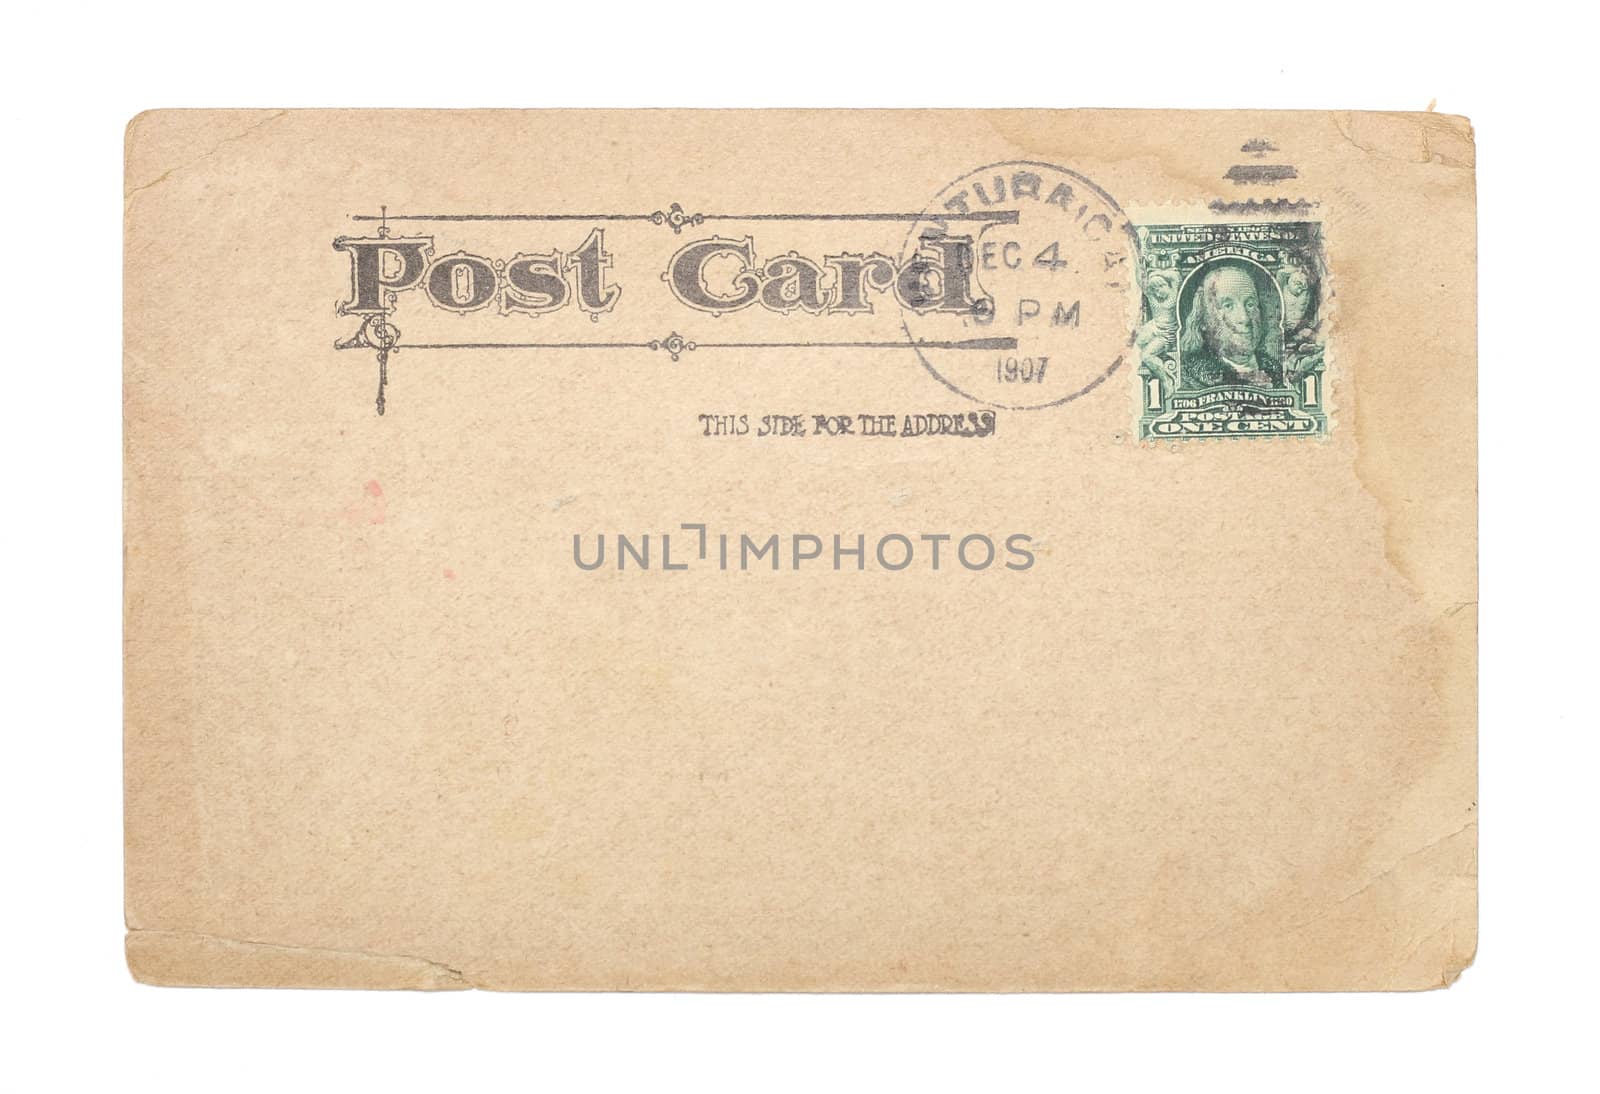 A blank, vintage United States postcard from 1907 with a green, cancelled, one-cent stamp. Post card shows water stains and creases.